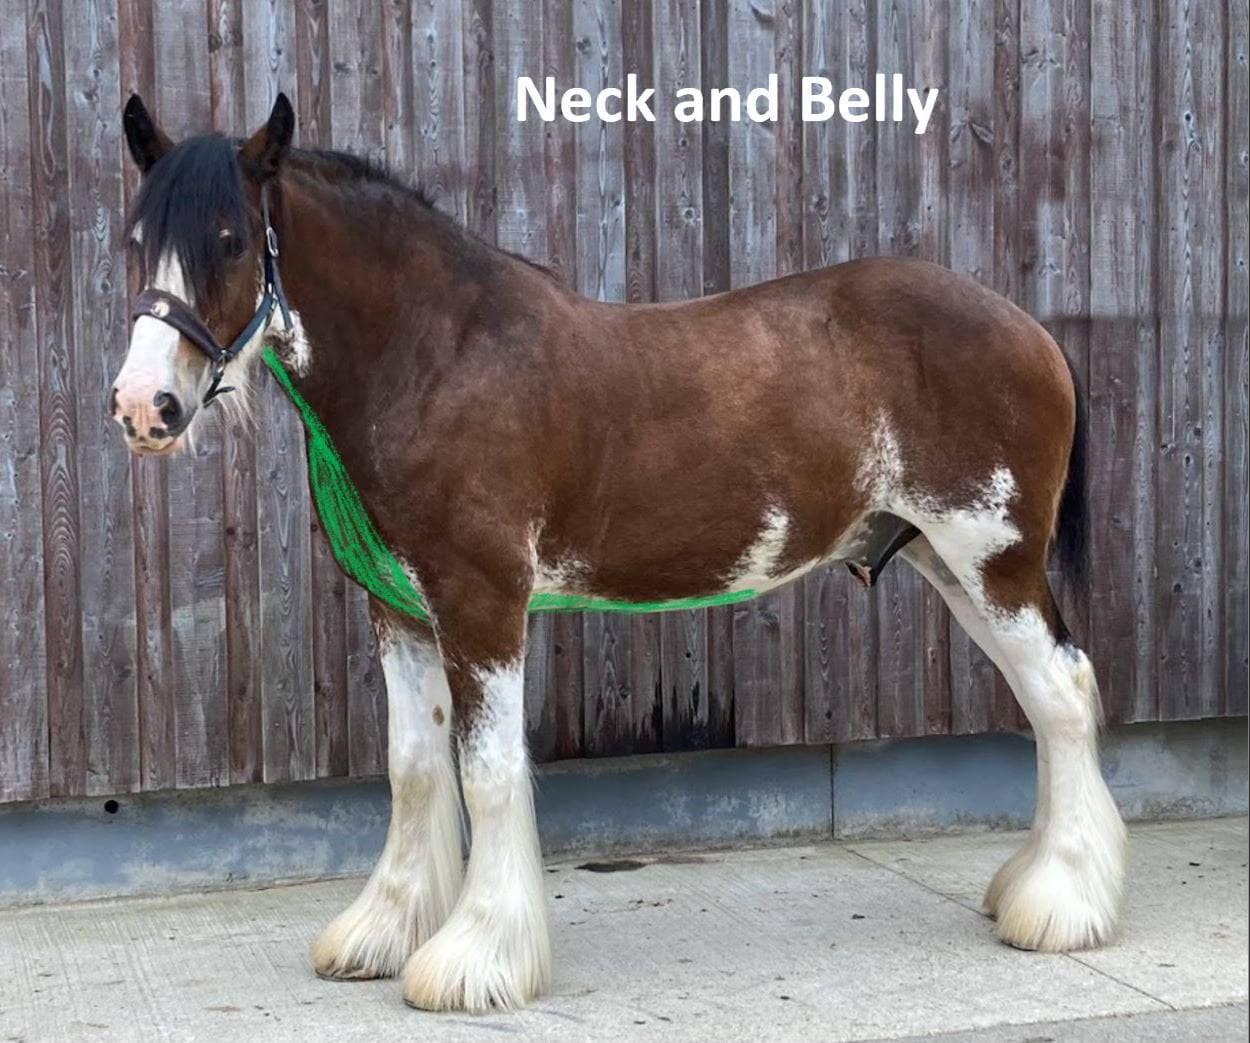 Clydesdale displaying a neck and belly clip